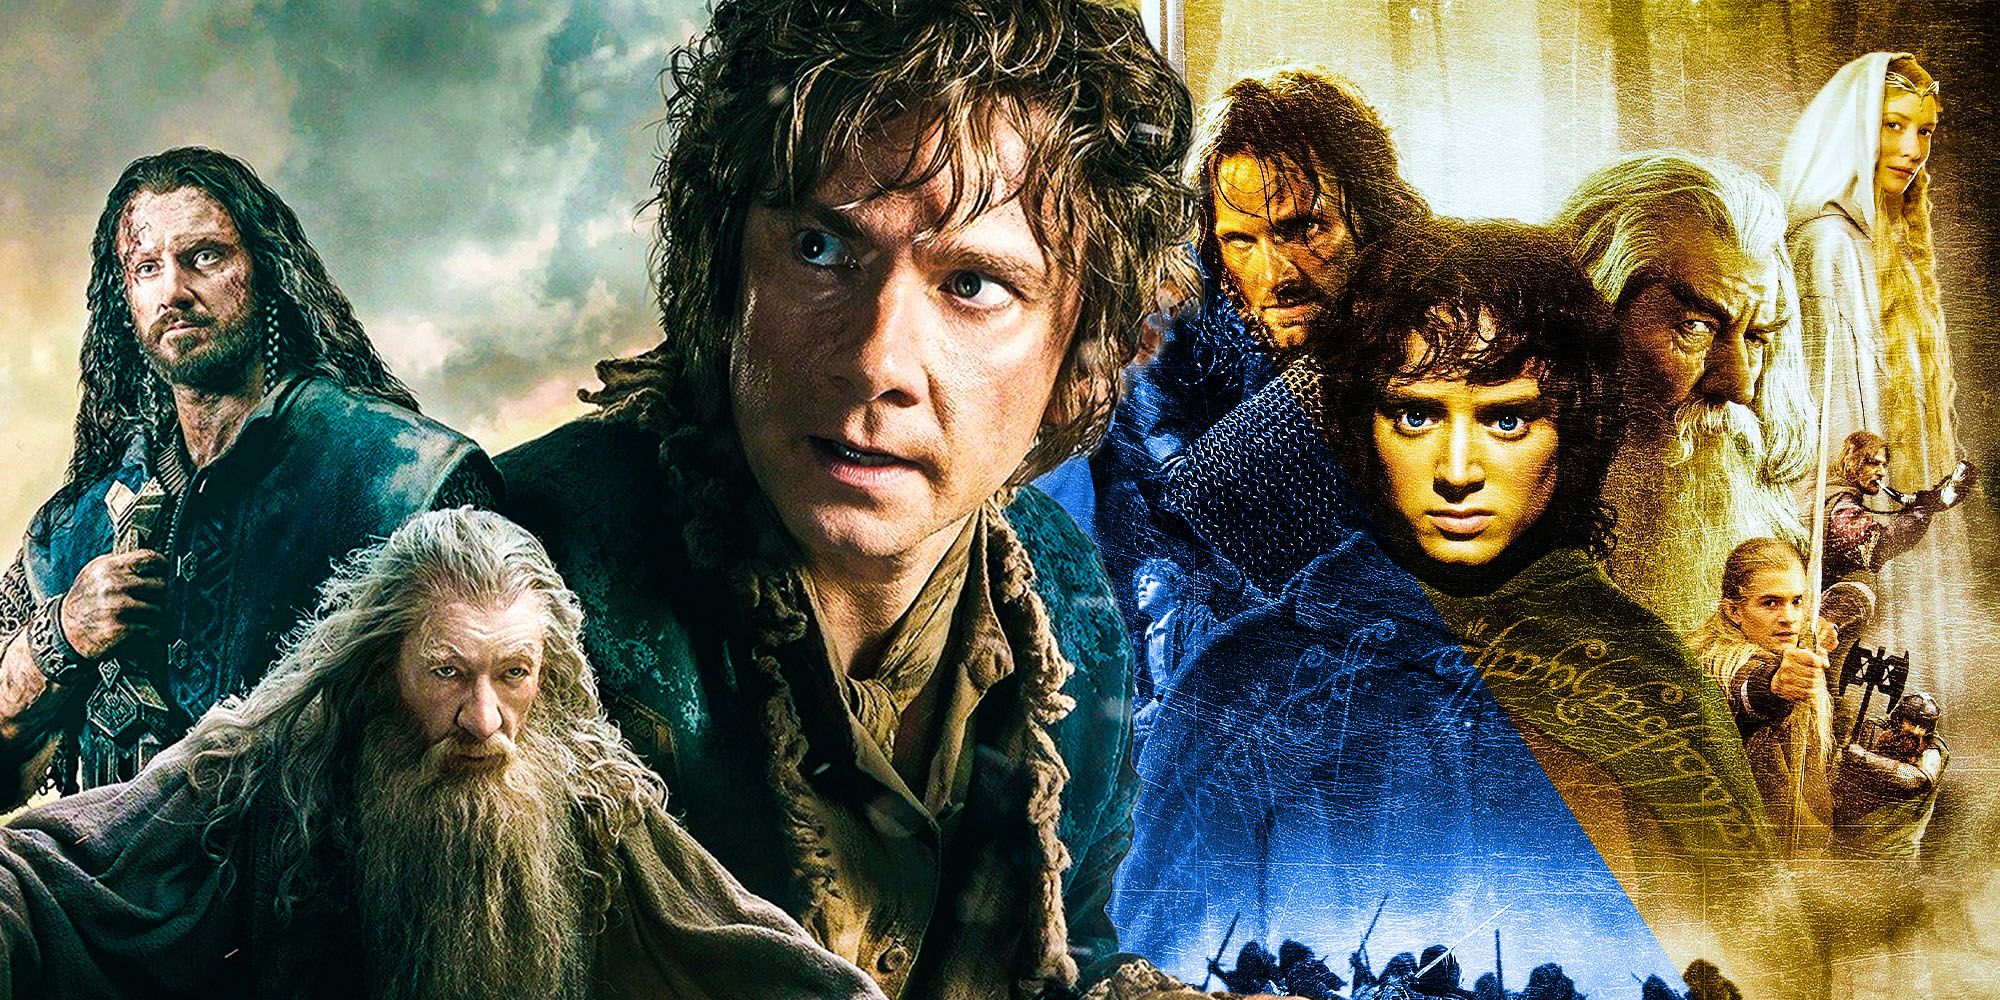 What Happened Between The Hobbit & Lord of the Rings